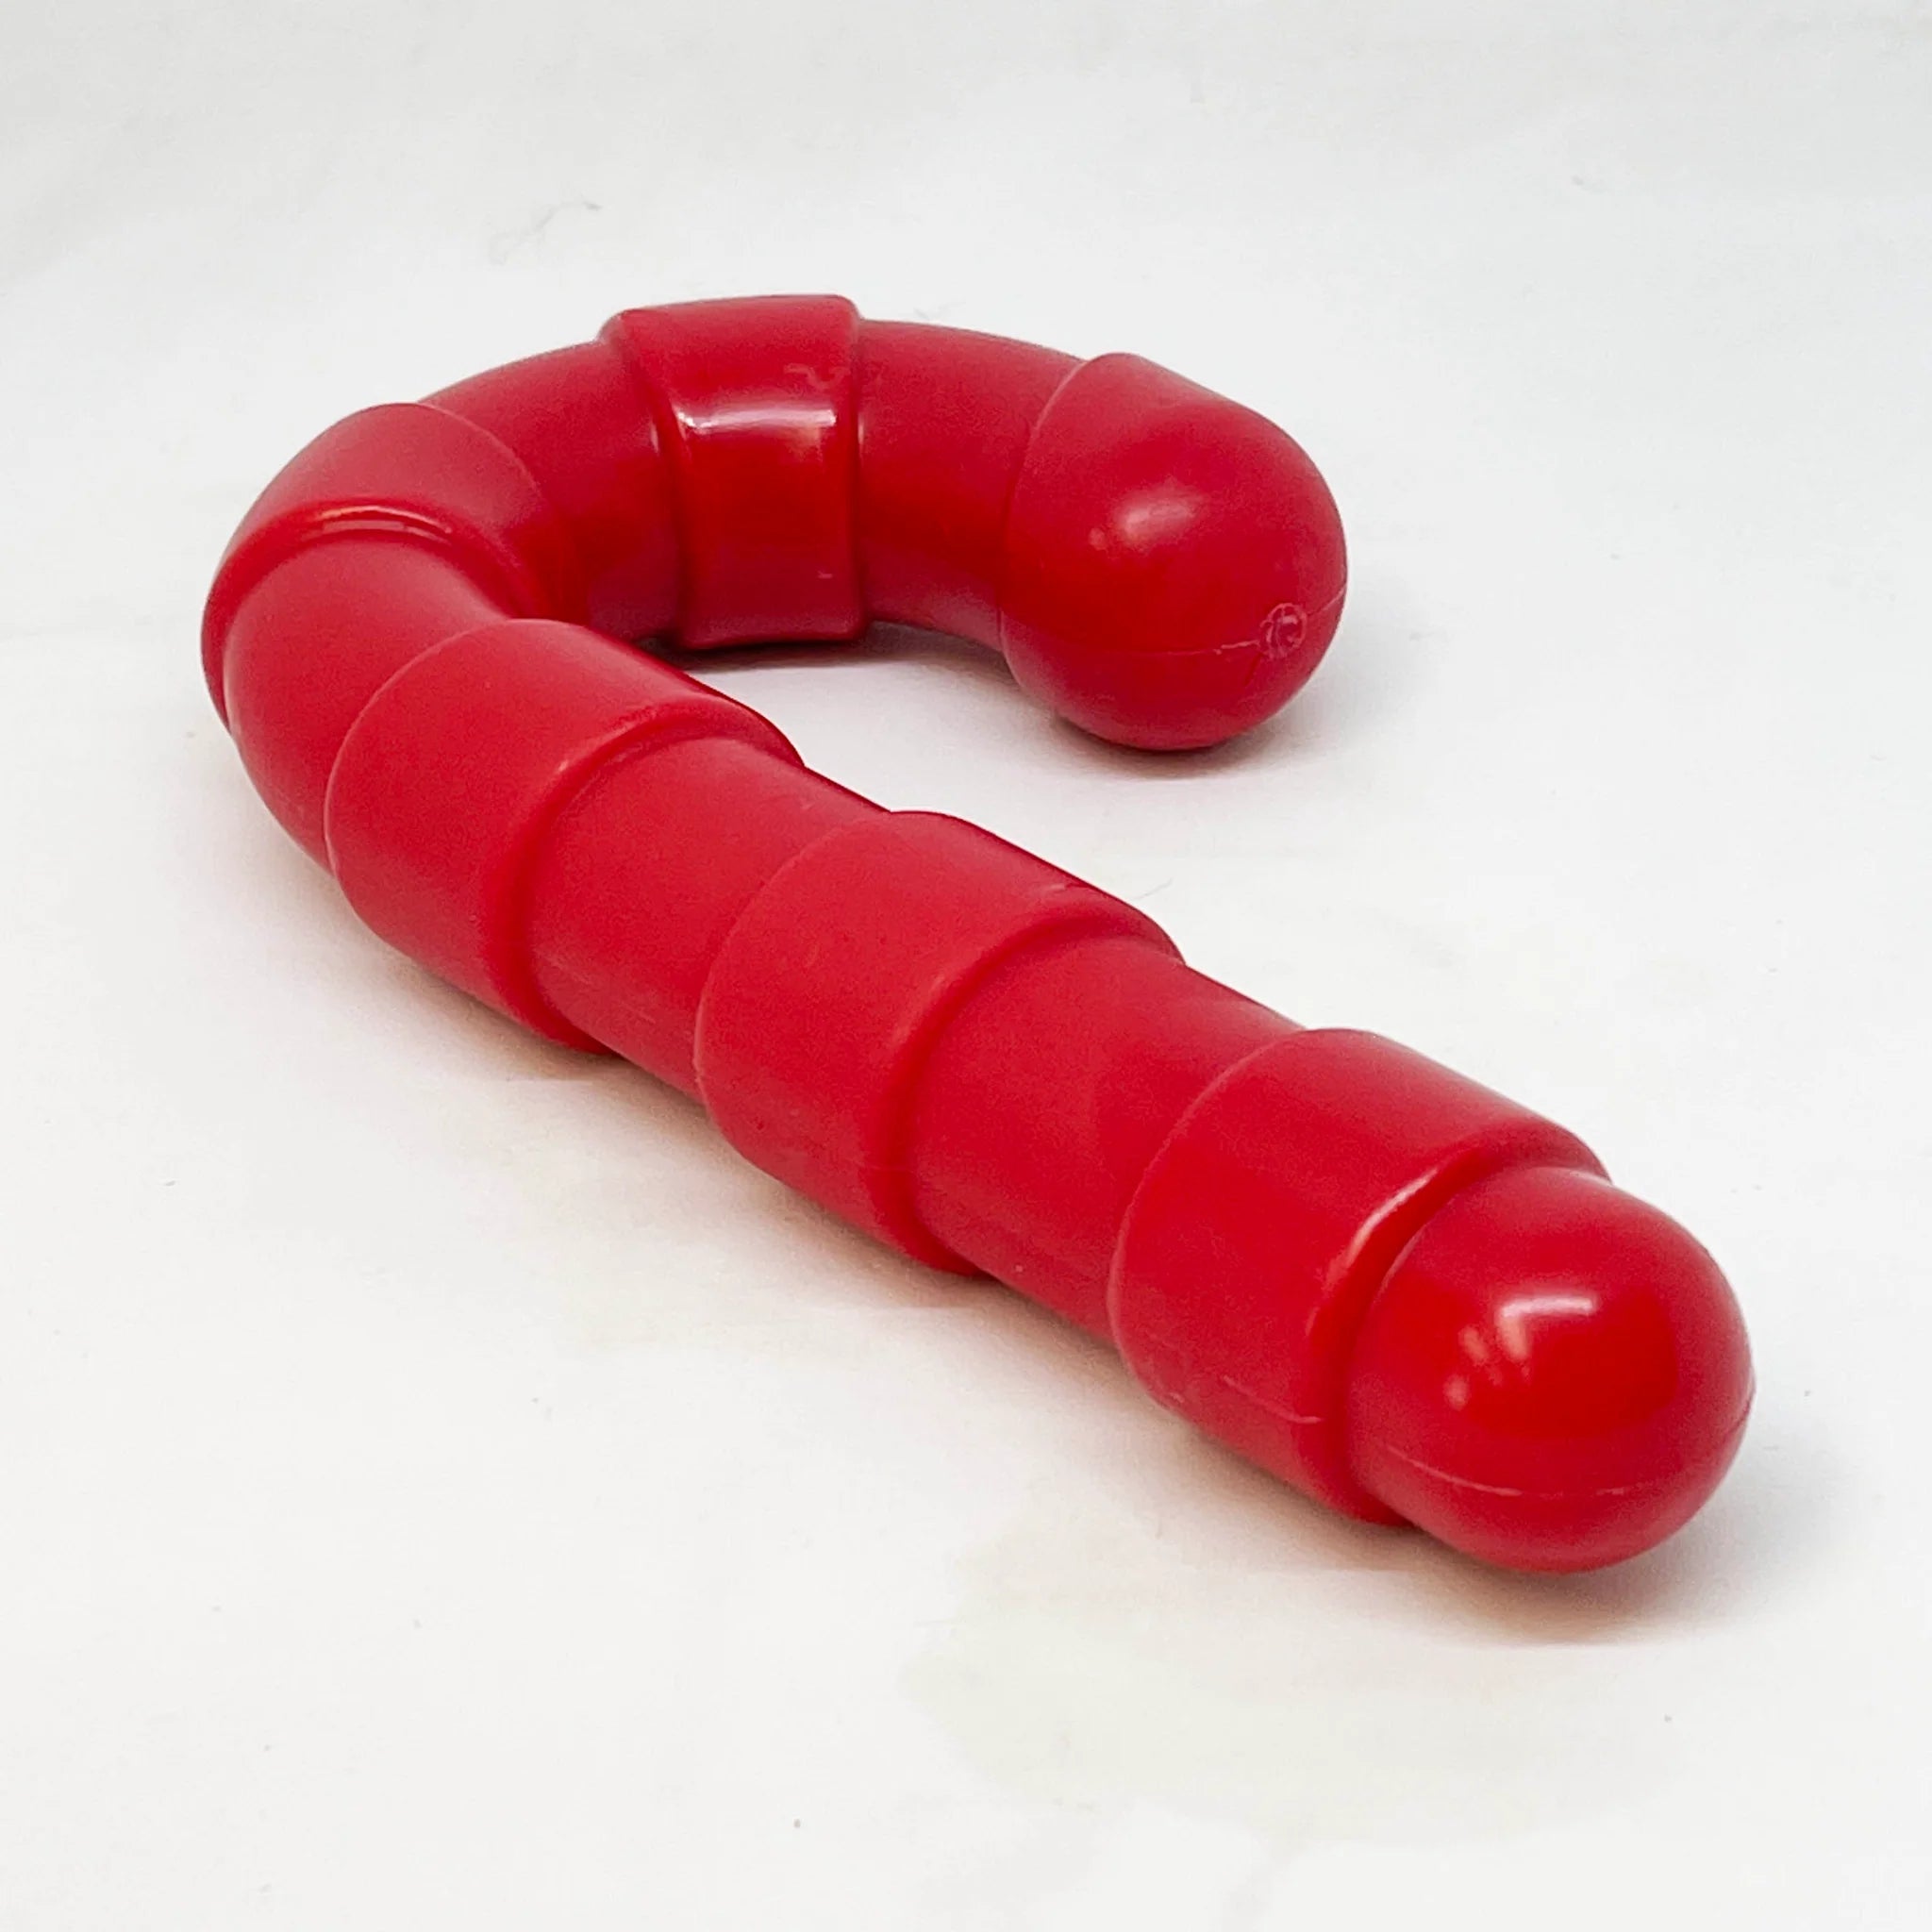 SODAPUP CANDY CANE DURABLE CHEW TOY